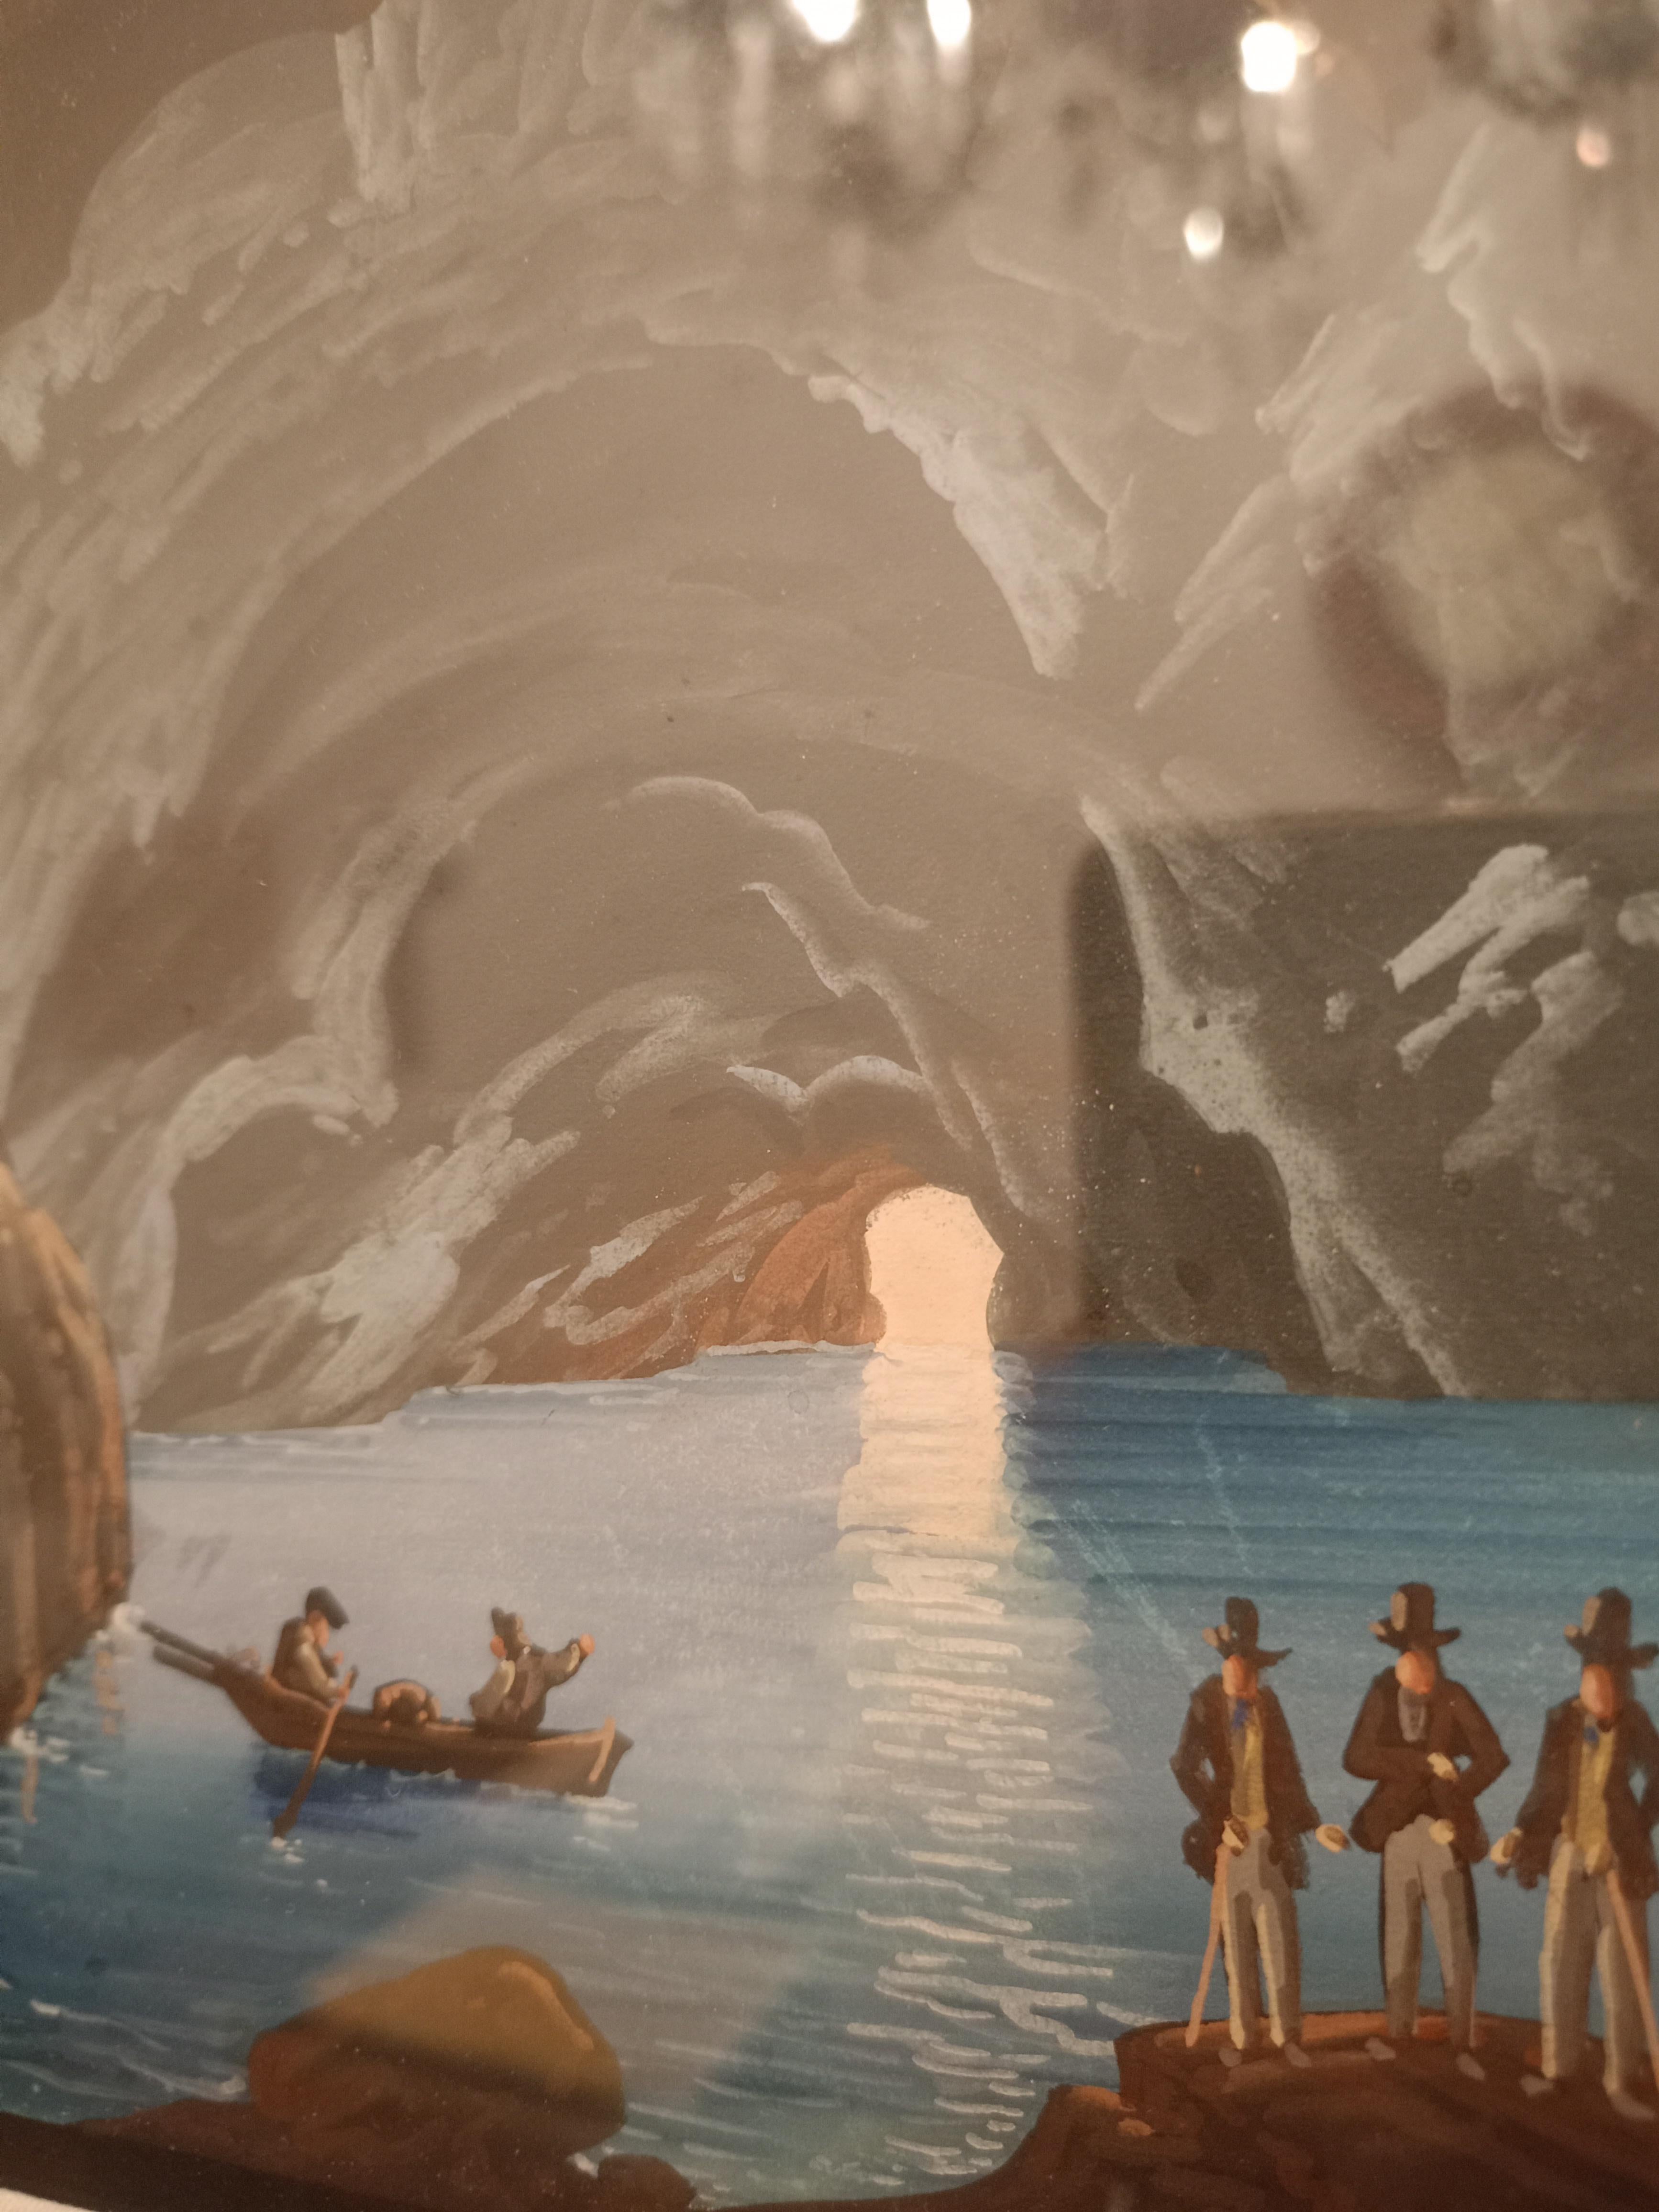 Antique Neapolitan gouches with coeval frame belonging to the early 20th century.

The scene depicts Capri's famous grotto as seen from the deepest point.

Providing a perspective background are four attentive men looking at the beauty of the cave